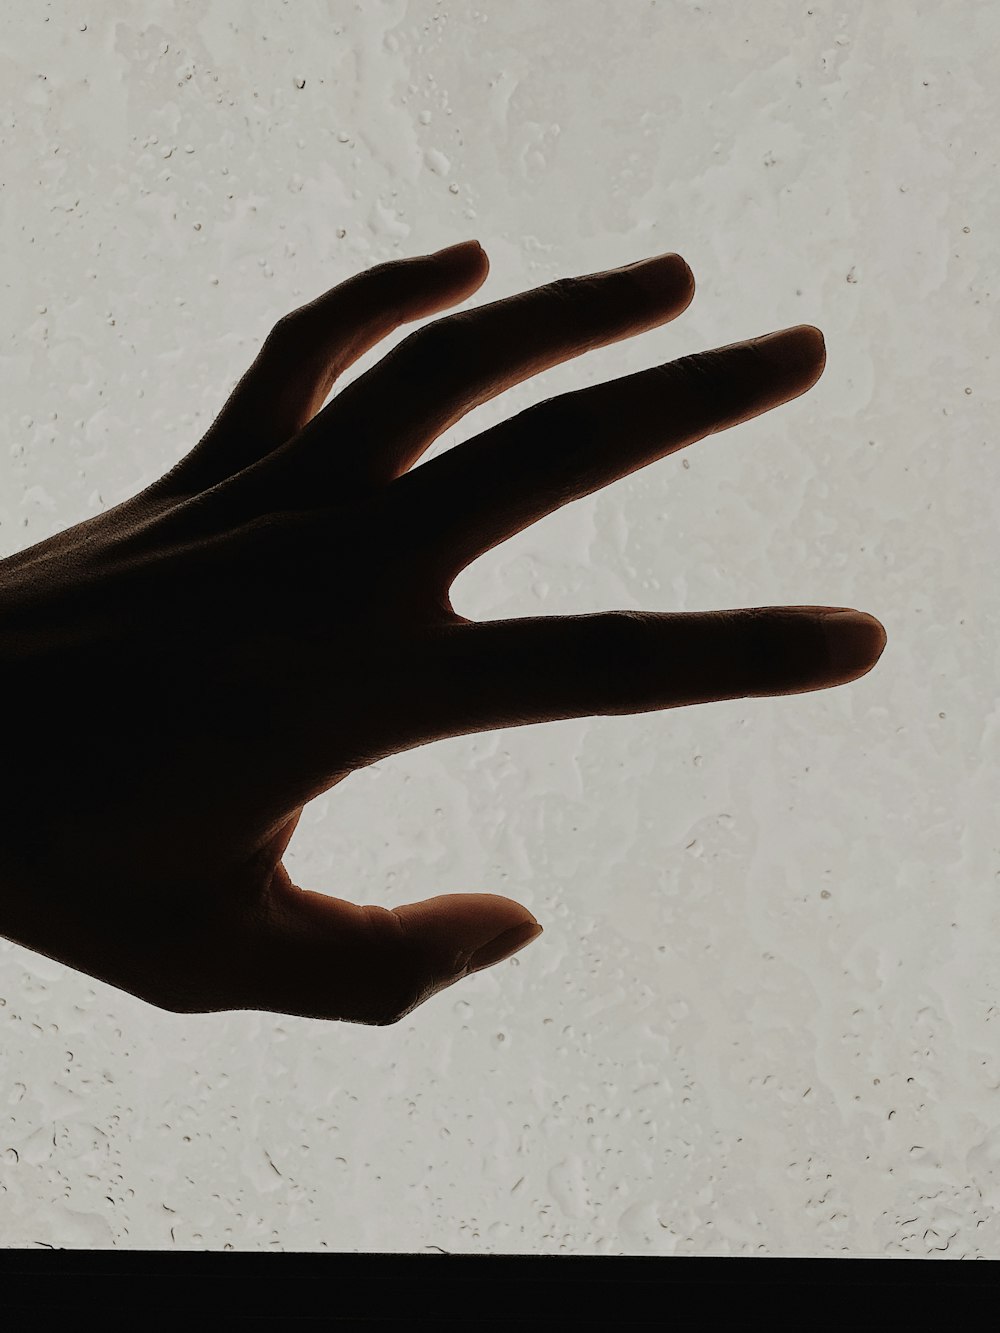 persons hand on white surface